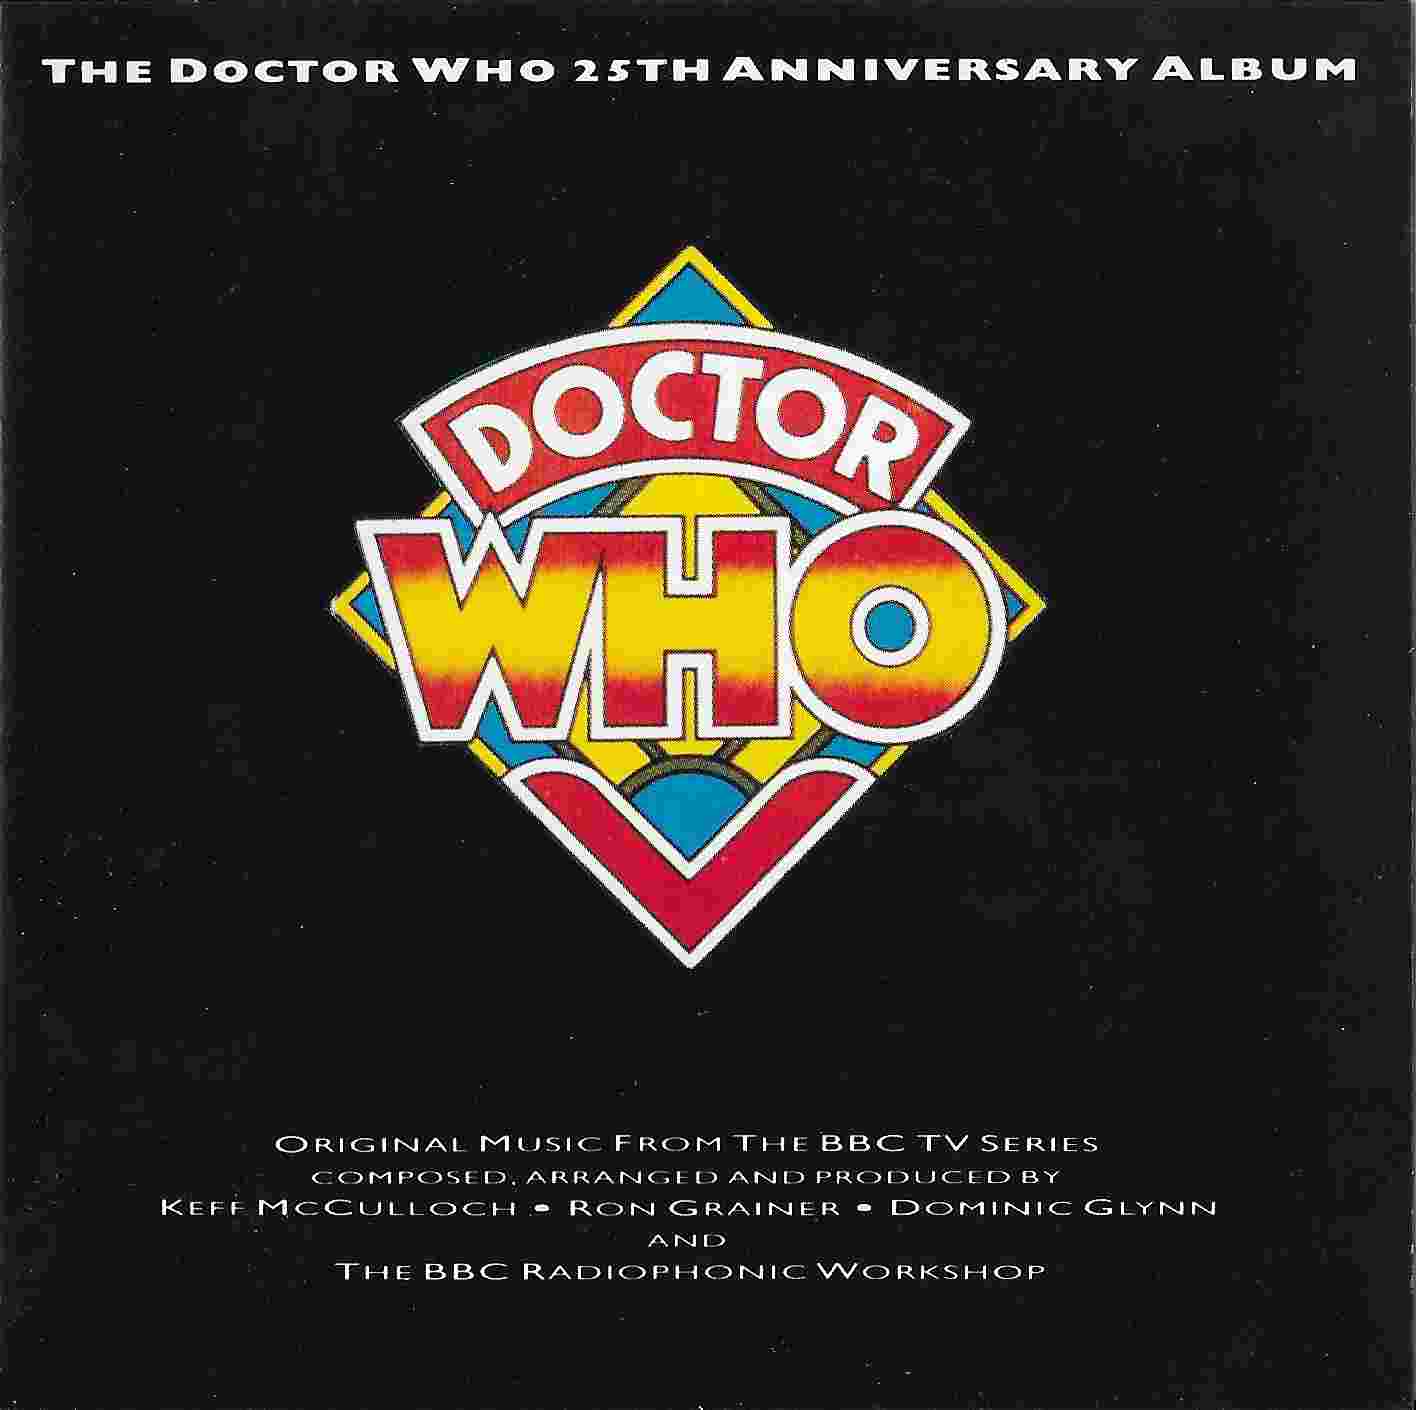 Picture of Doctor Who - 25th anniversary album by artist Ron Grainer / Dominic Glynn / Keff McCulloch from the BBC cds - Records and Tapes library